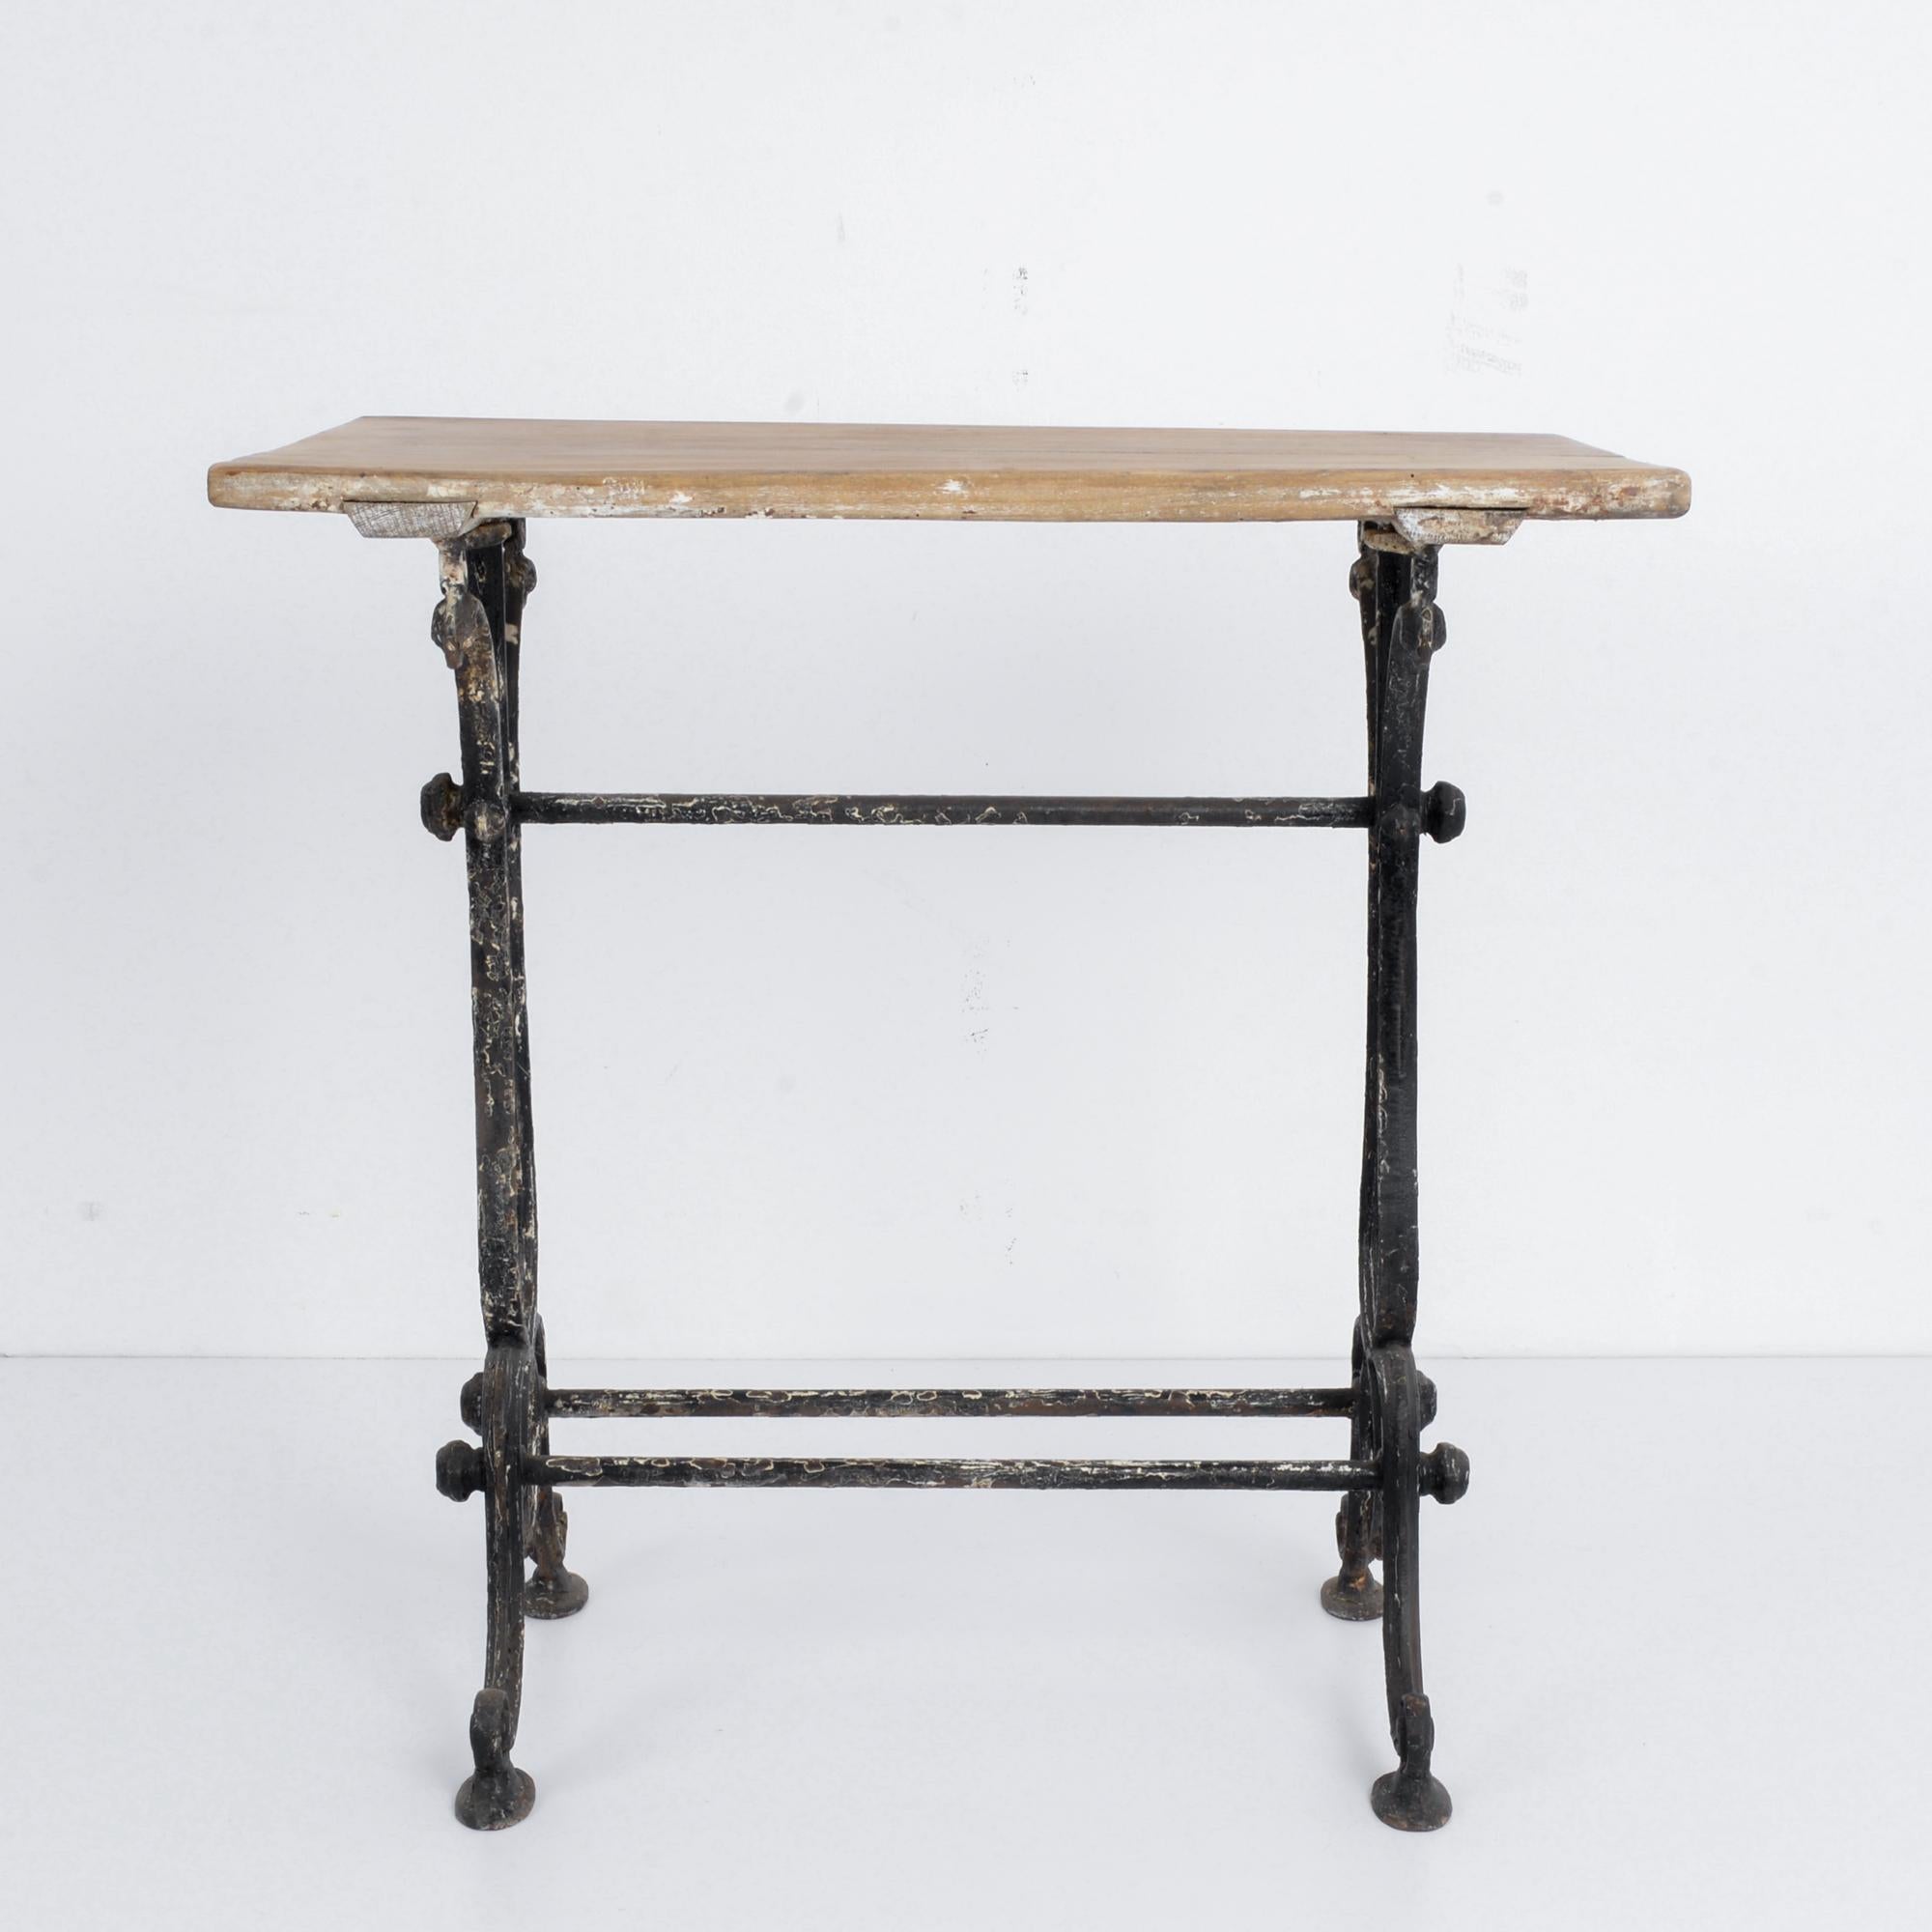 This bistro table with a cast iron frame and wooden tabletop was made in France, circa 1920. The horizontal lines of the table and stretchers highlight the elegant, curvilinear table legs. The table features a timeworn patina, evoking the bustle and